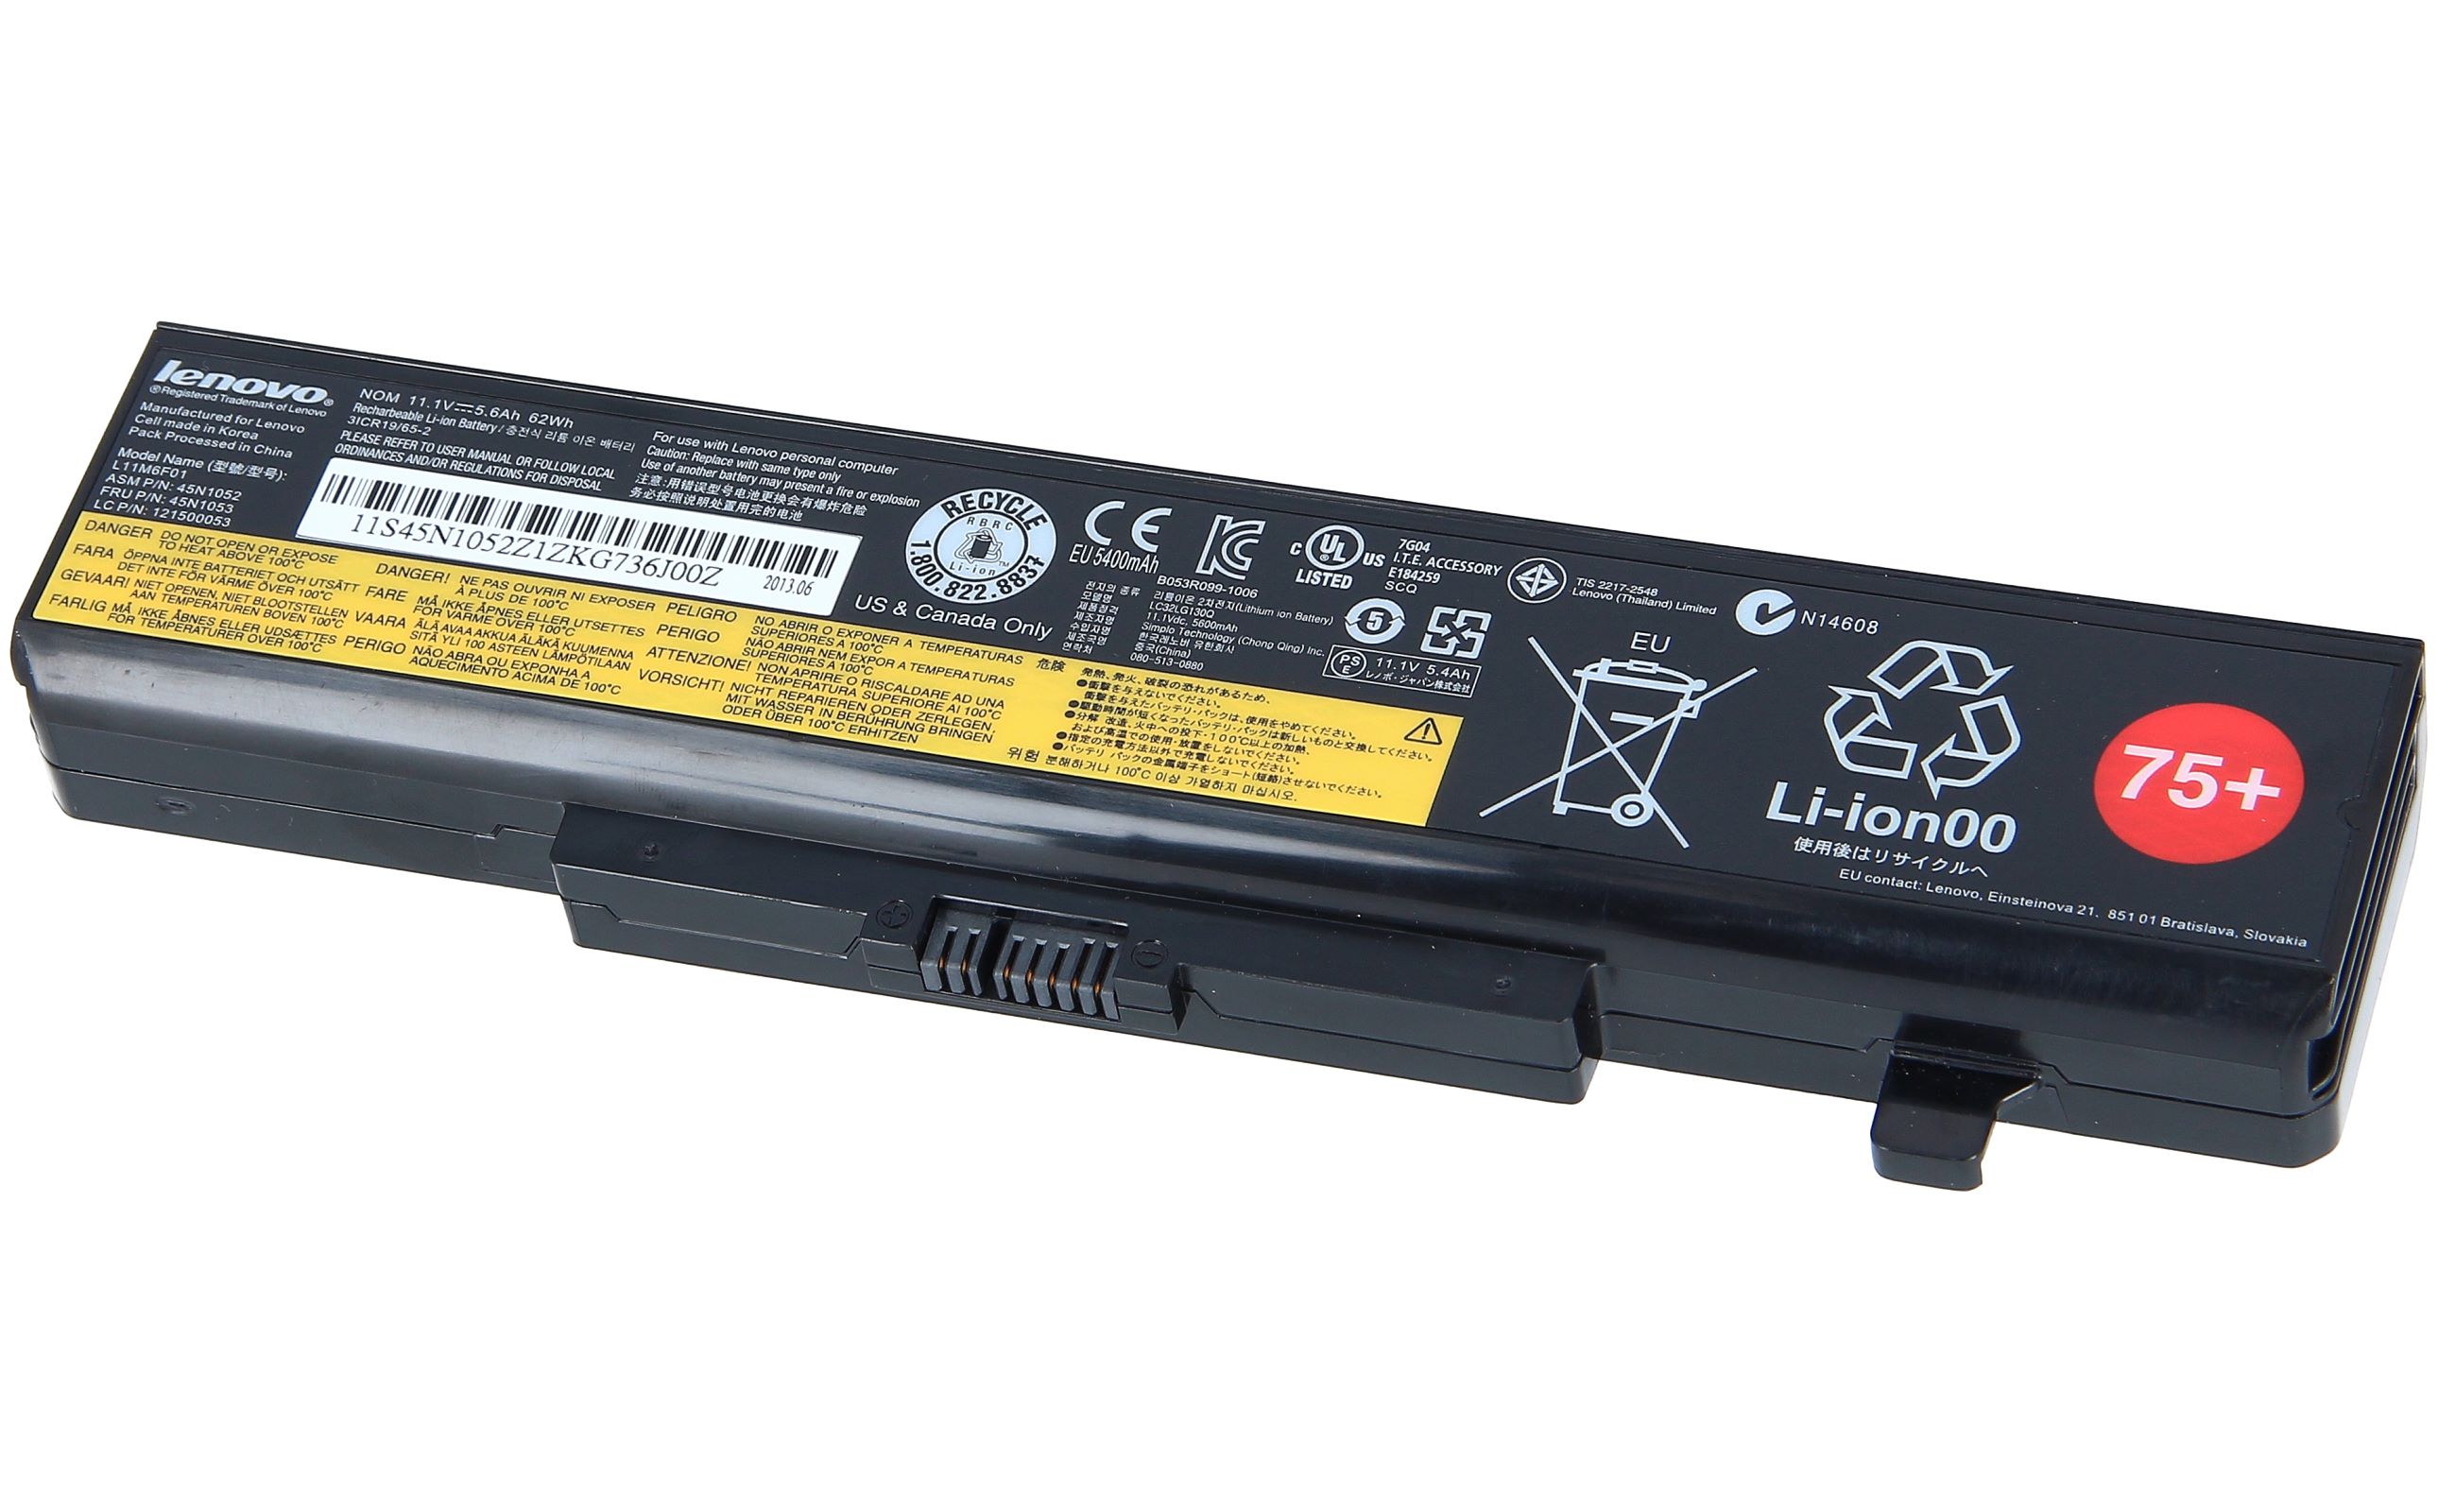 Why does the lenovo thinkpad battery die so quicly mme73 el